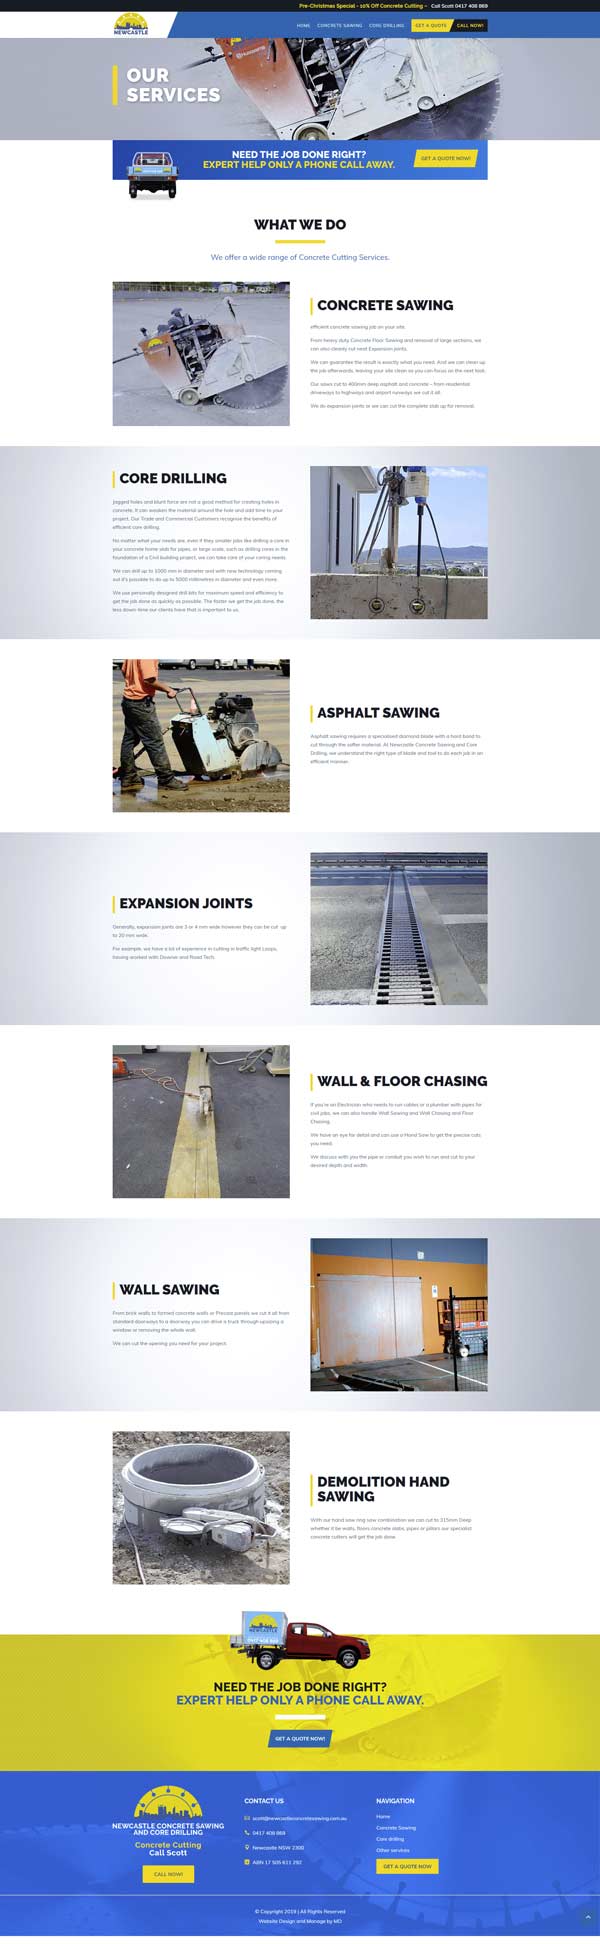 Newcastle Concrete About Newcastle Concrete Sawing And Core Drilling Website Development